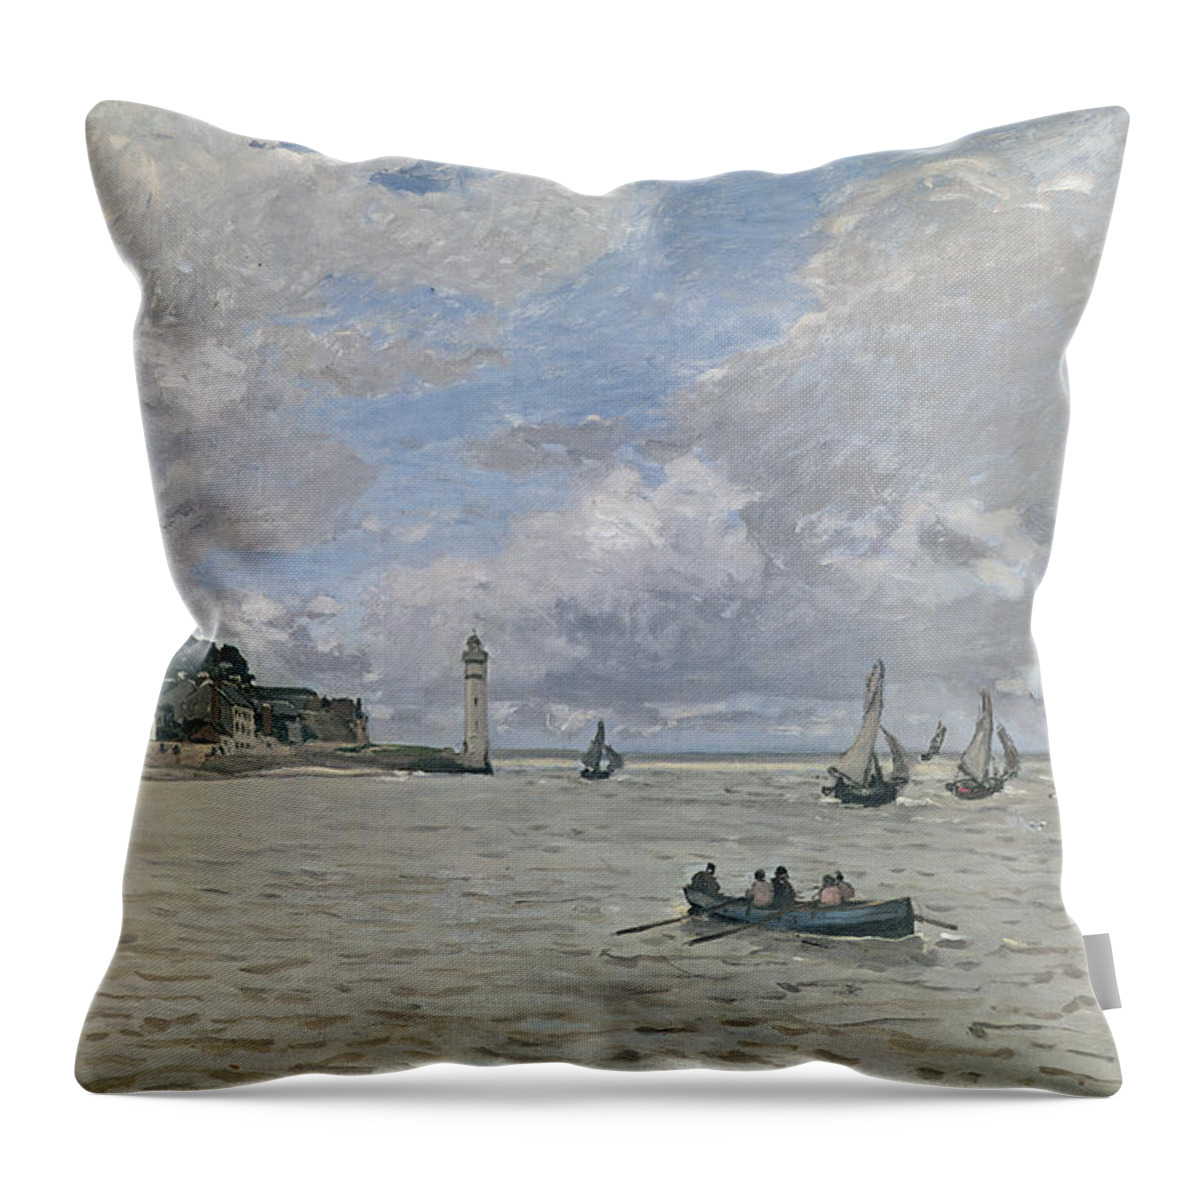 Monet Throw Pillow featuring the painting The Lighthouse Of The Hospice Honfleur, 1864 by Claude Monet